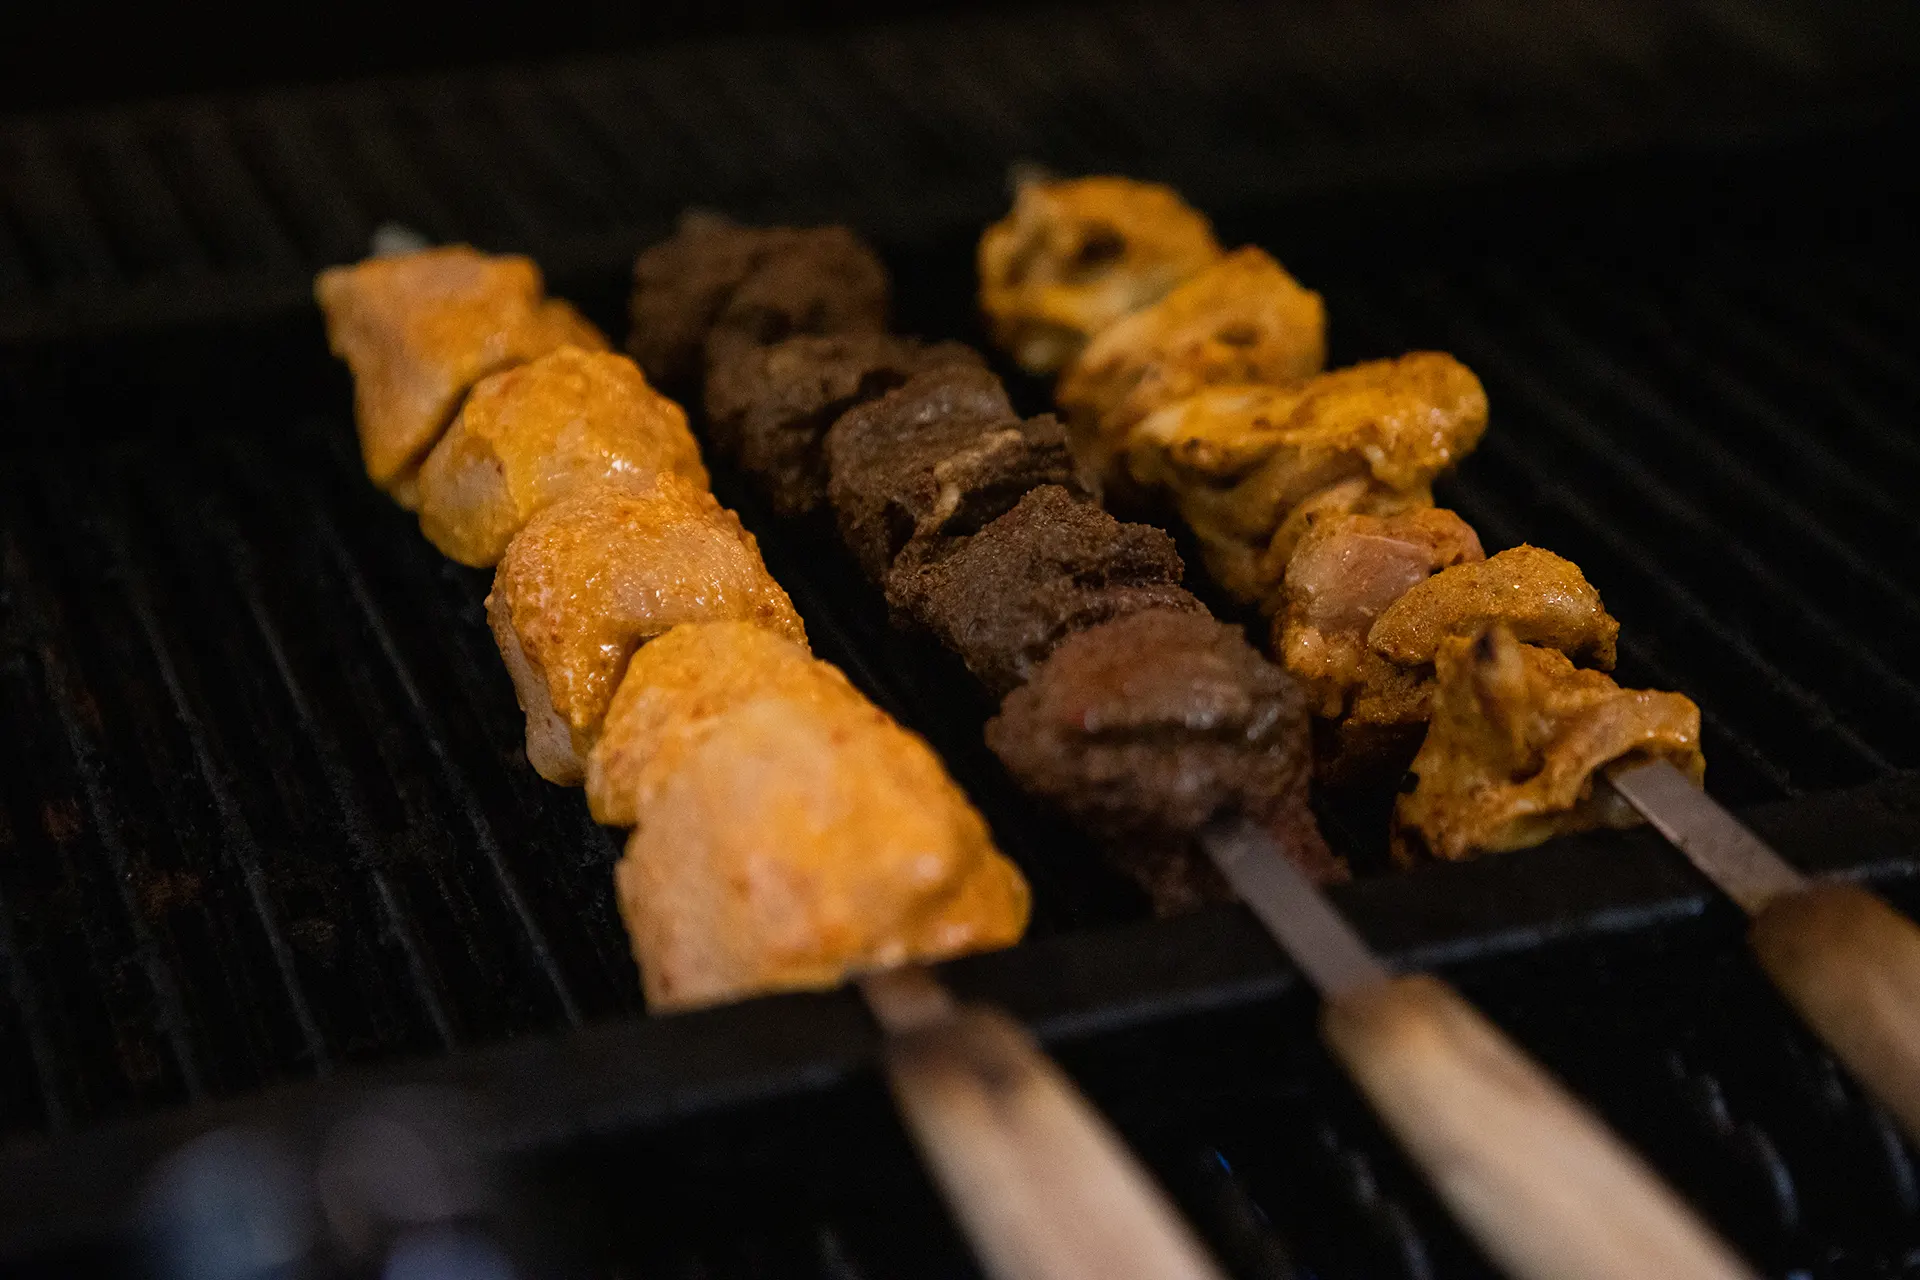 One white meat Chicken Kabob skewer, One dark meat Chicken Kabob skewer, and one Filet Mignon skewer are placed on the grill in the hummus labs kitchen.